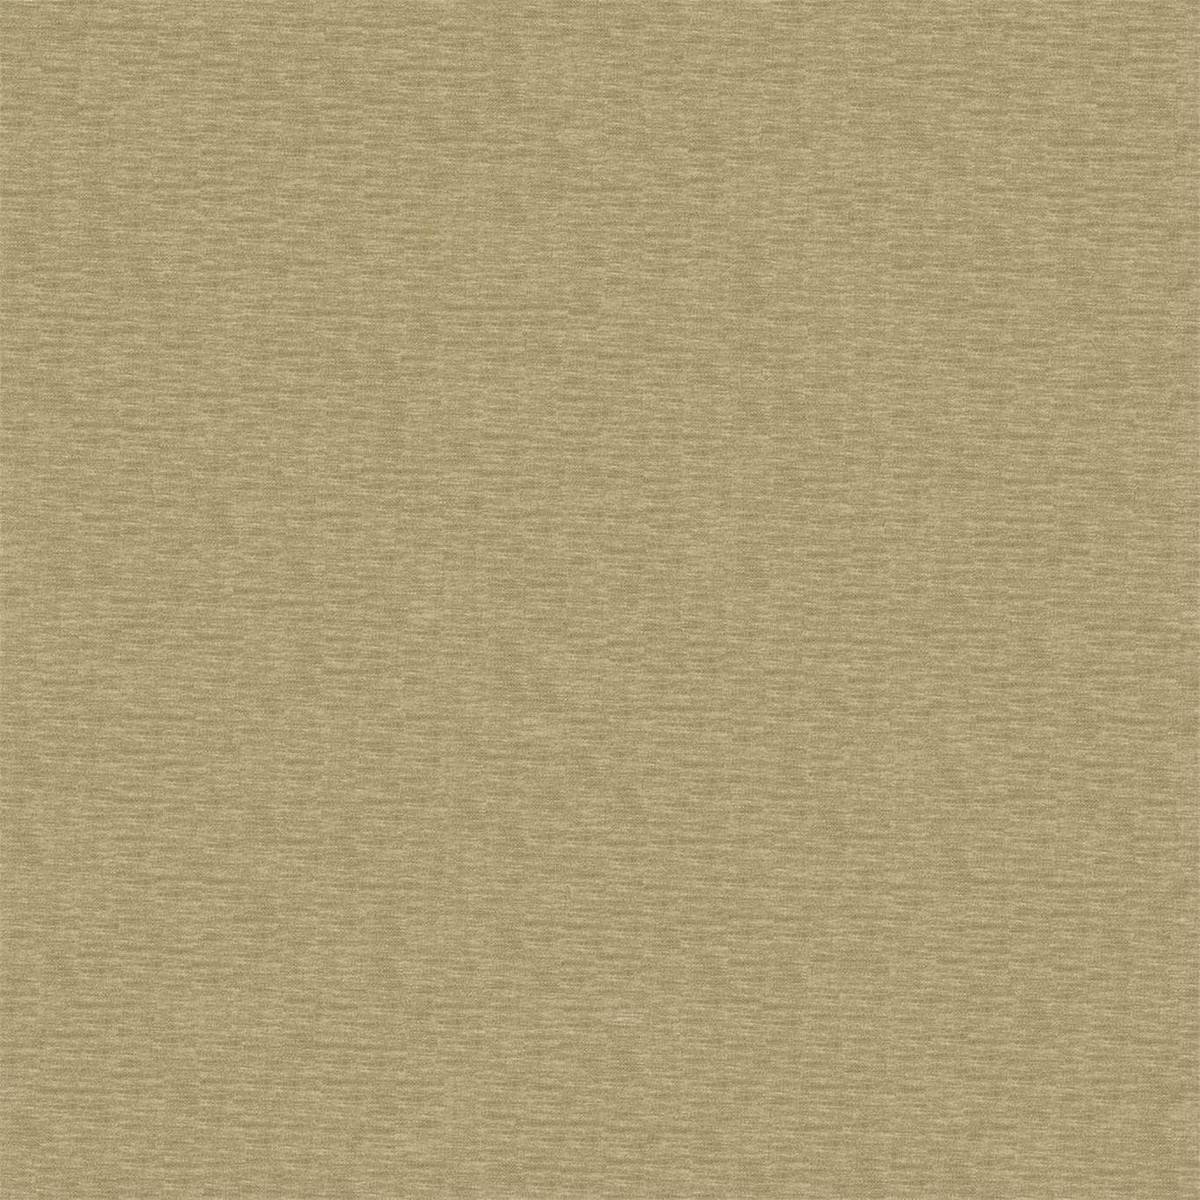 Esala Plains Willow Fabric by Scion